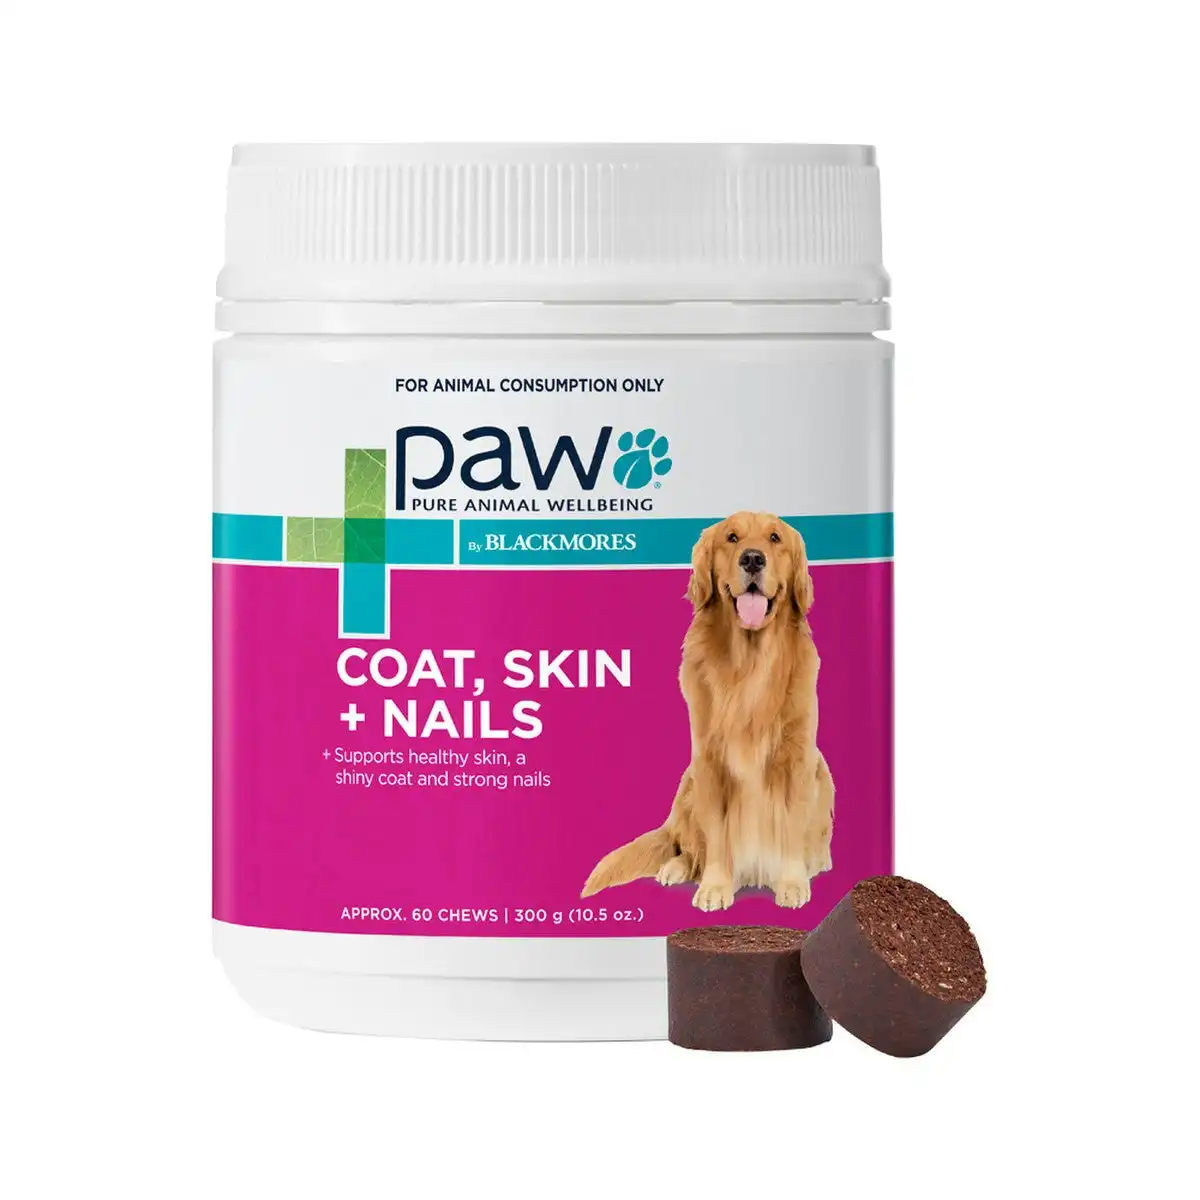 Paw By Blackmores Coat, Skin + Nails (For Dogs approx 60 Chews) 300g